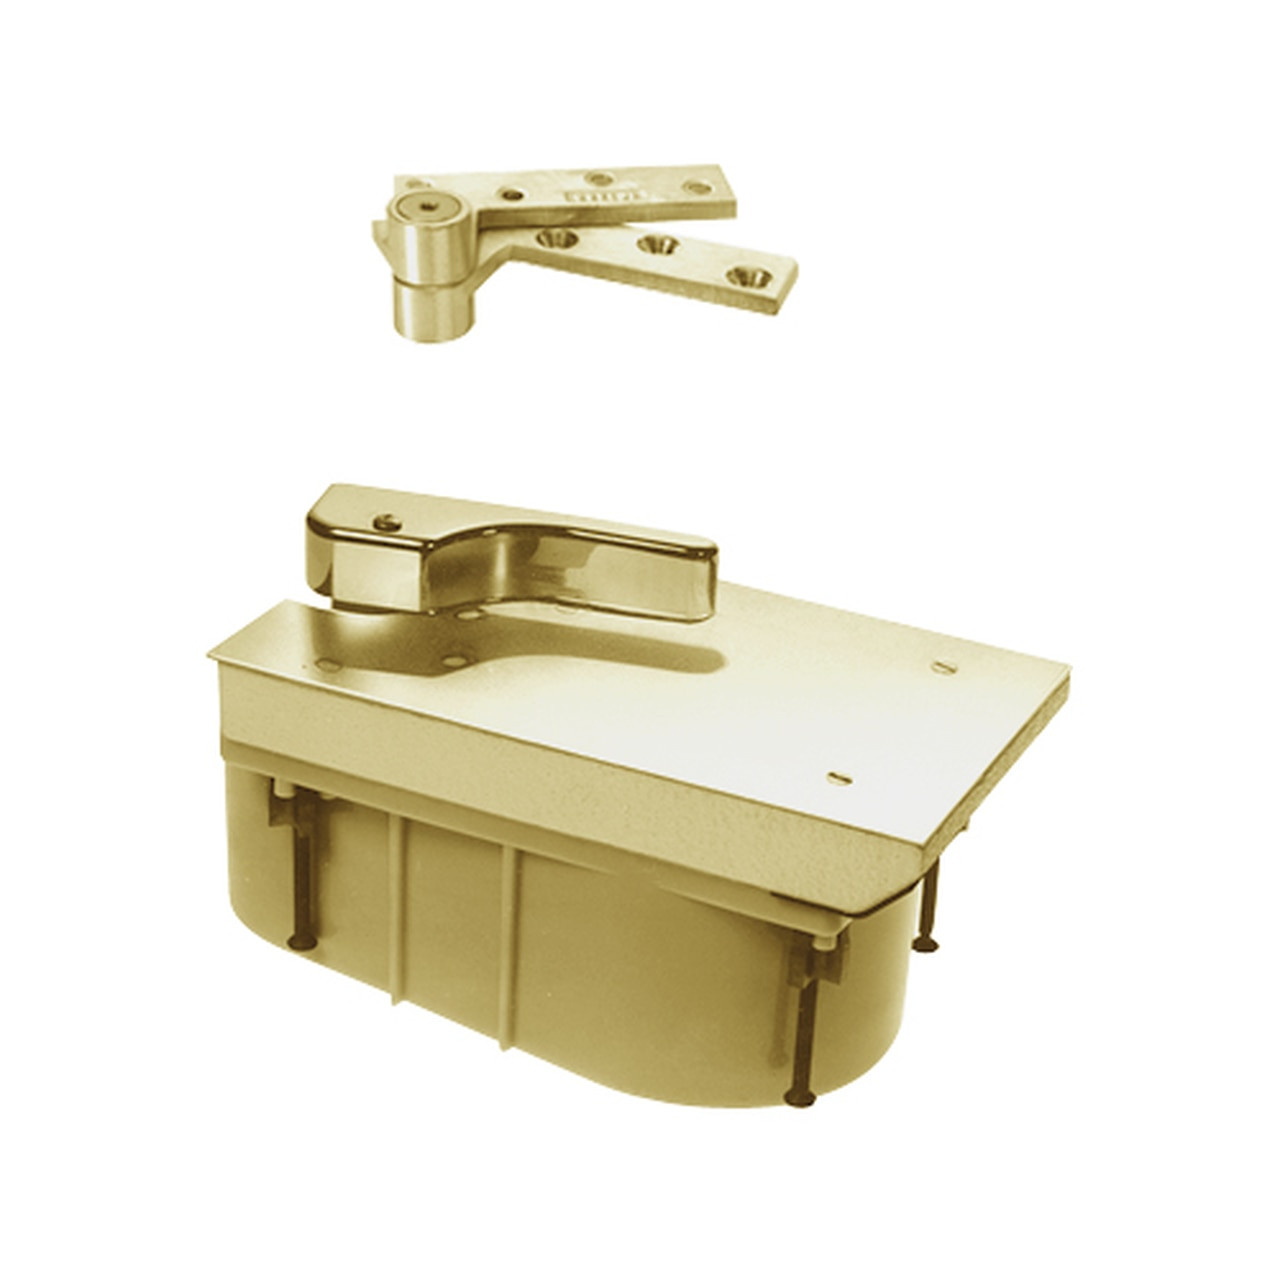 FQ27-90N-LCC-LH-606 Rixson 27 Series Heavy Duty Quick Install Offset Hung Floor Closer in Satin Brass Finish